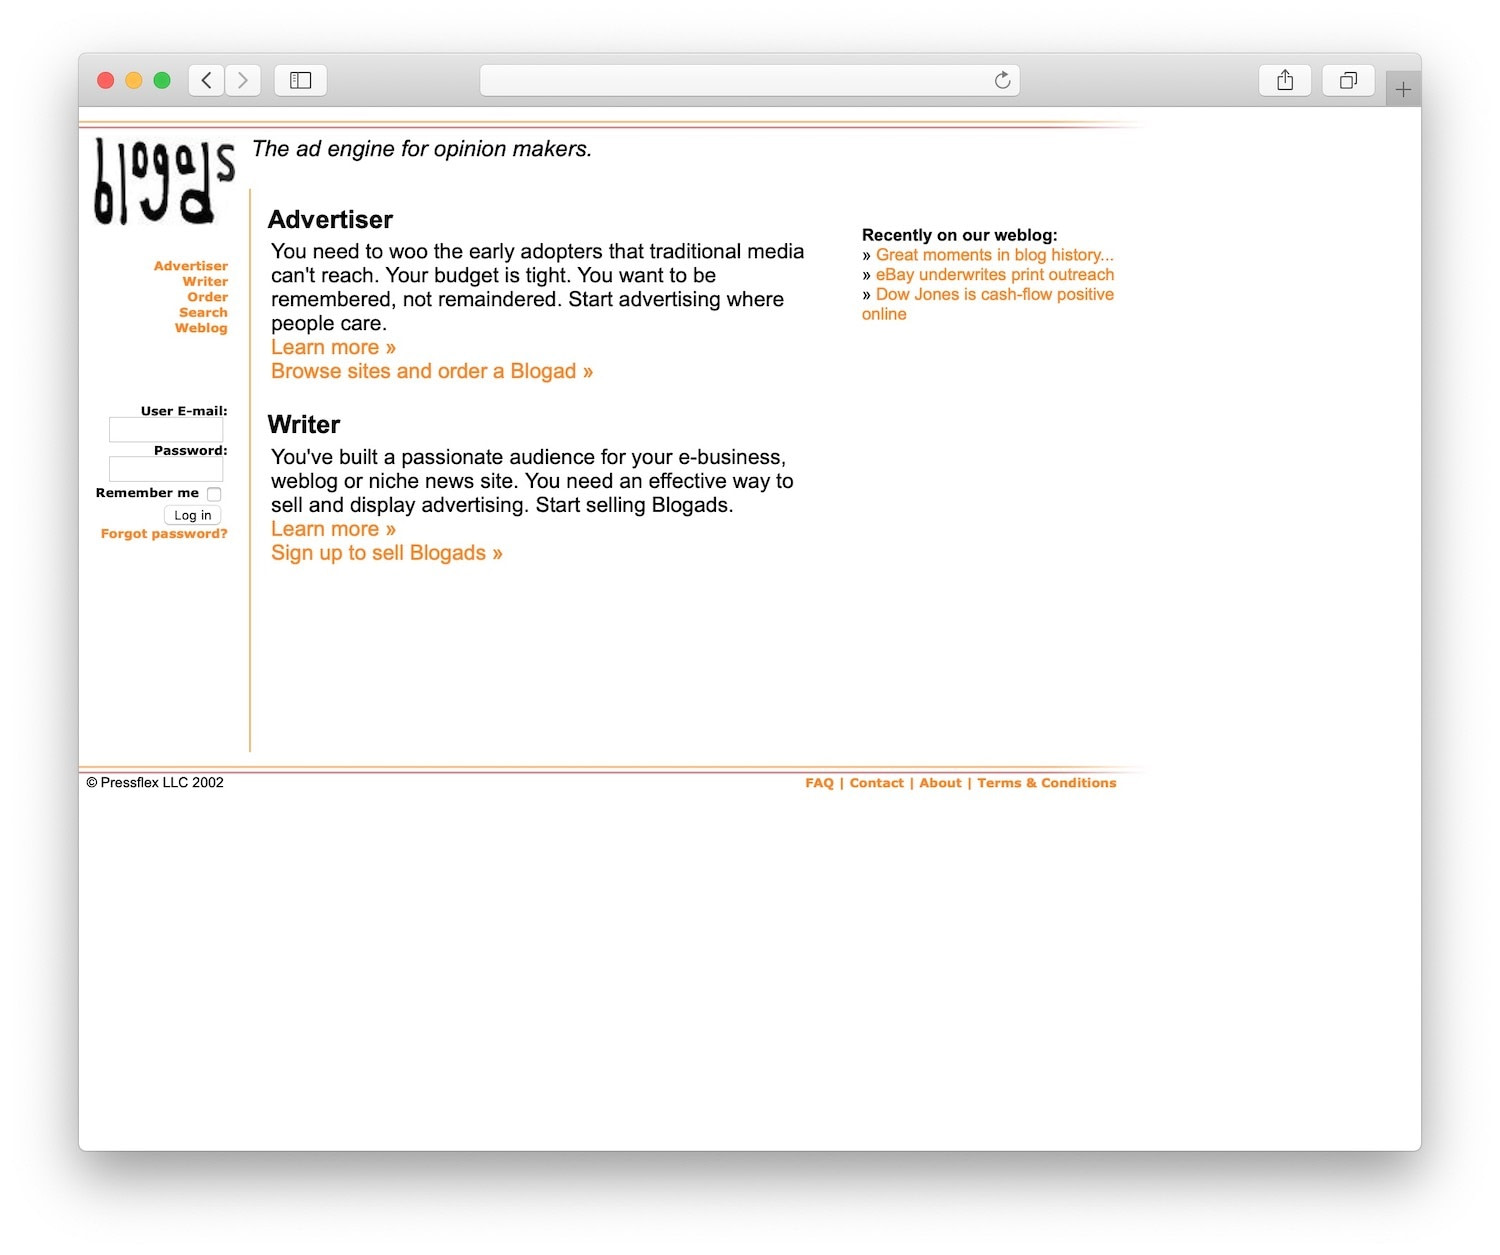 blogads was one of the first ad services for blogging